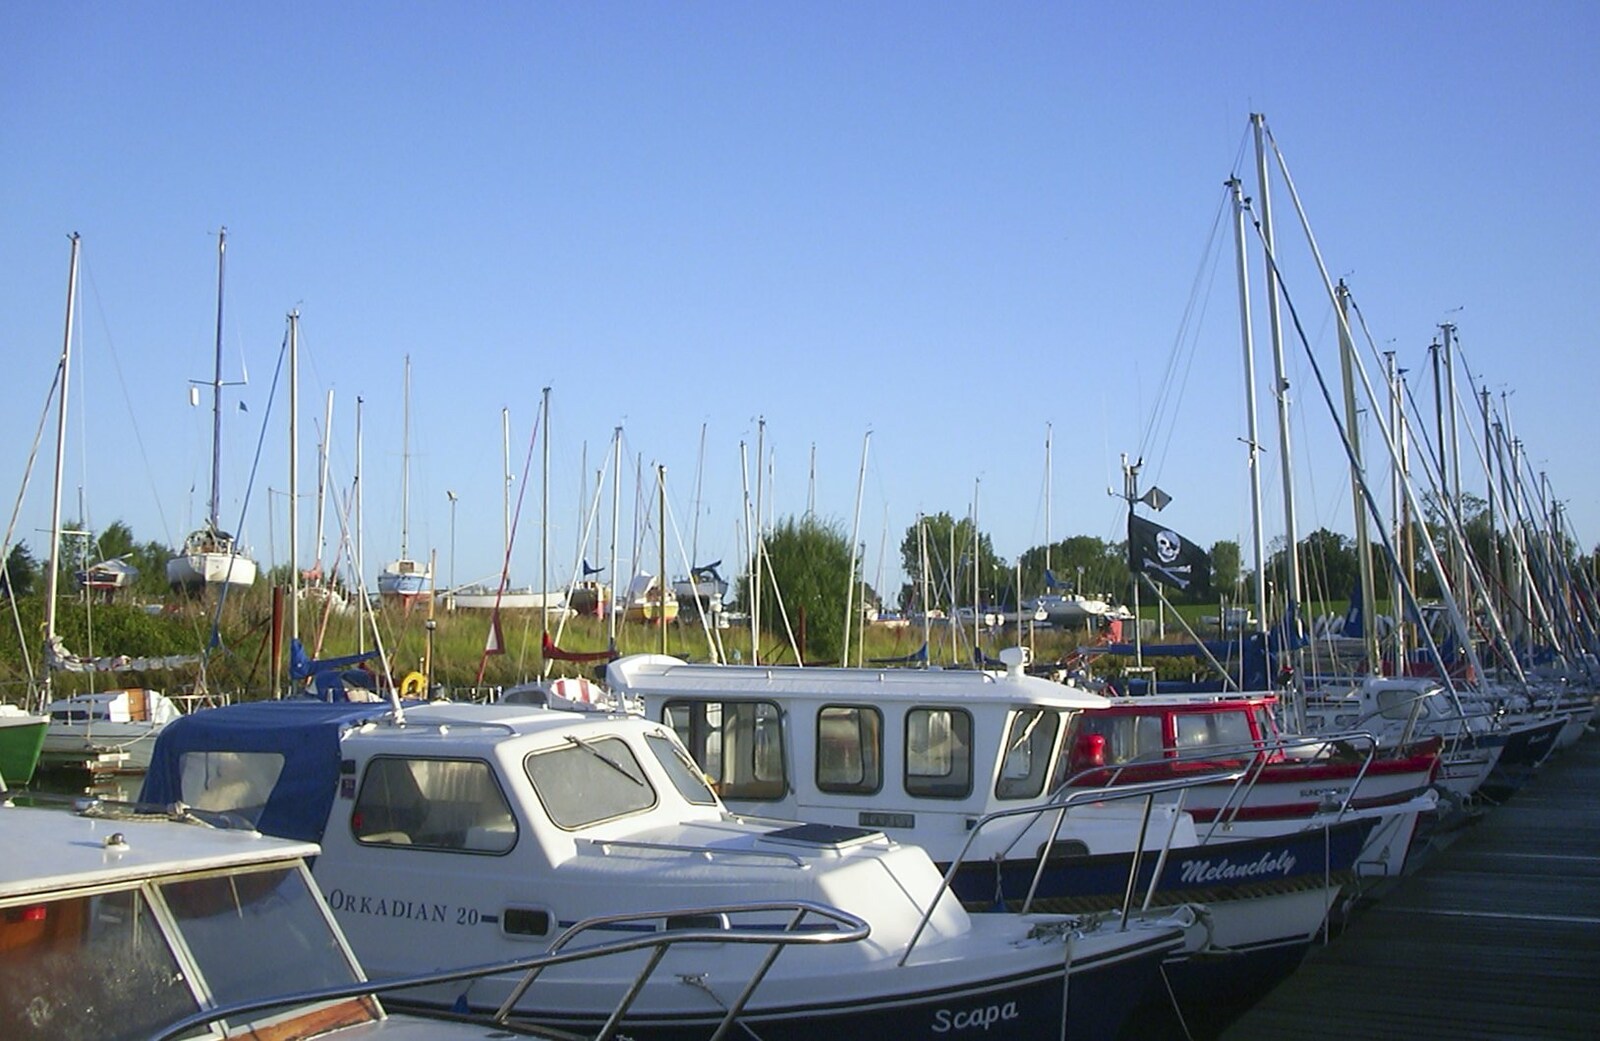 A 3G Lab Sailing Trip, Shotley, Suffolk - 6th September 2001: The morning after